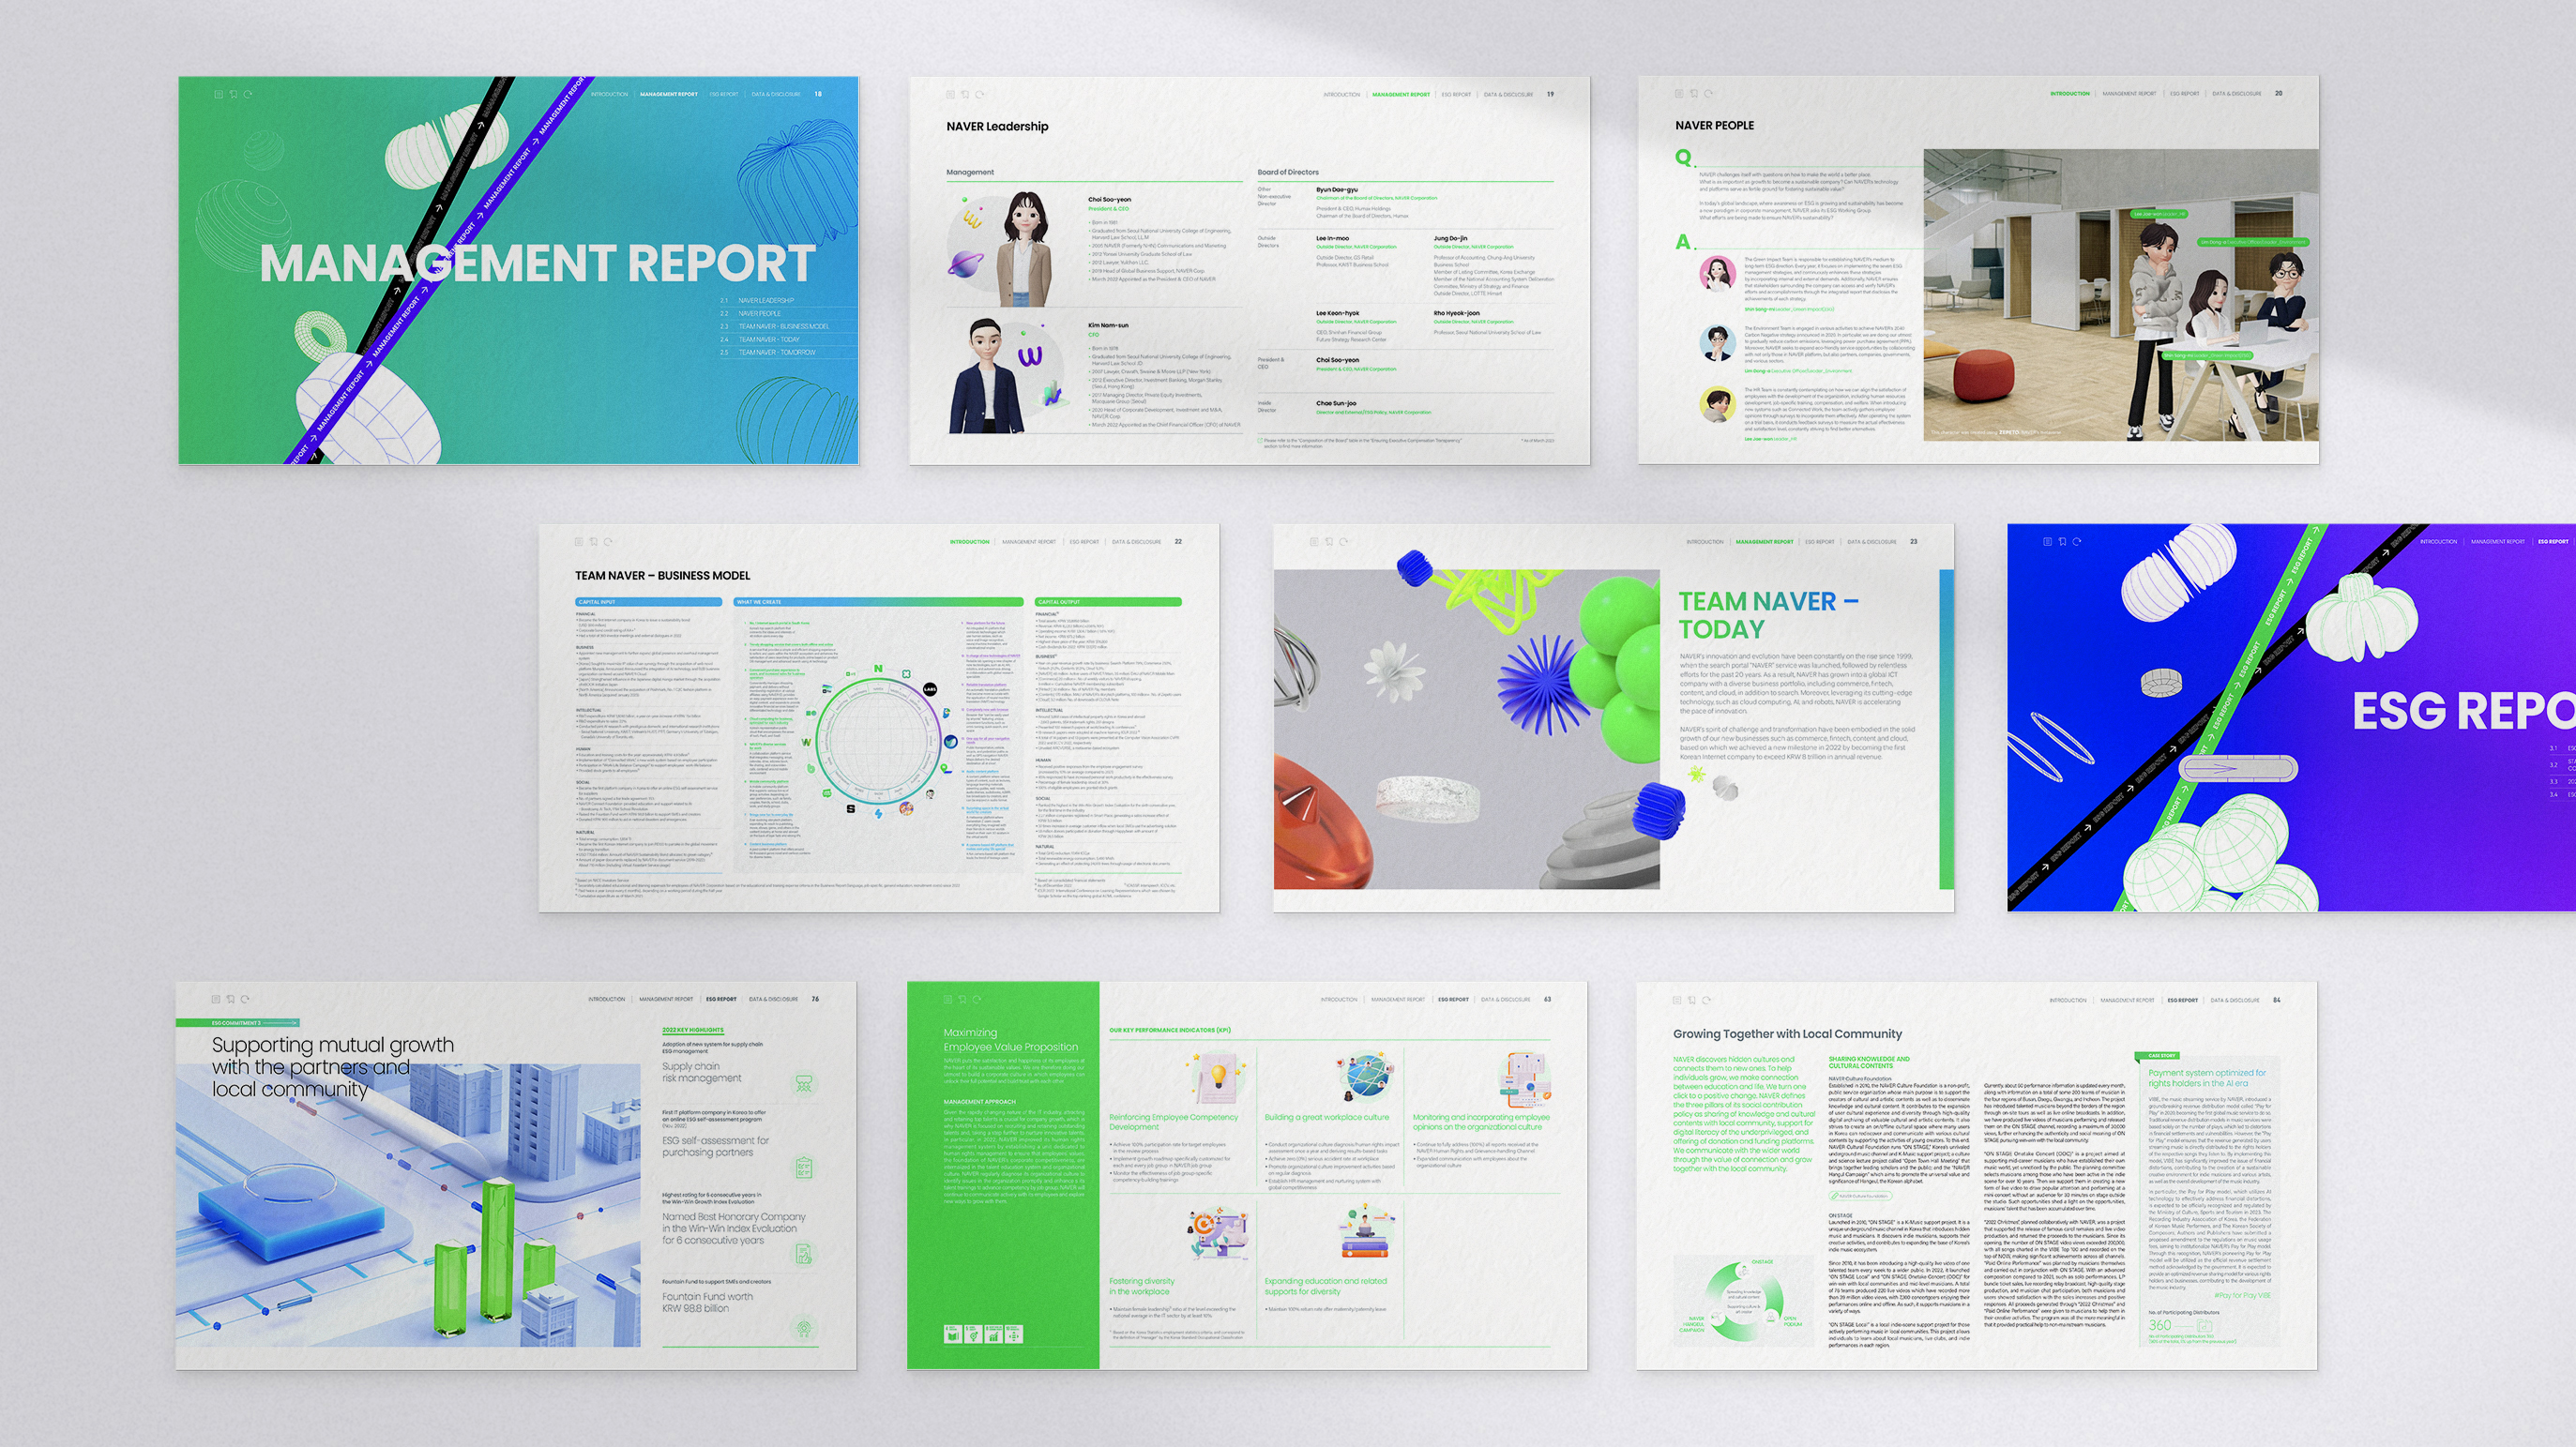 NAVER Integrated Report – Created by TEAM NAVER